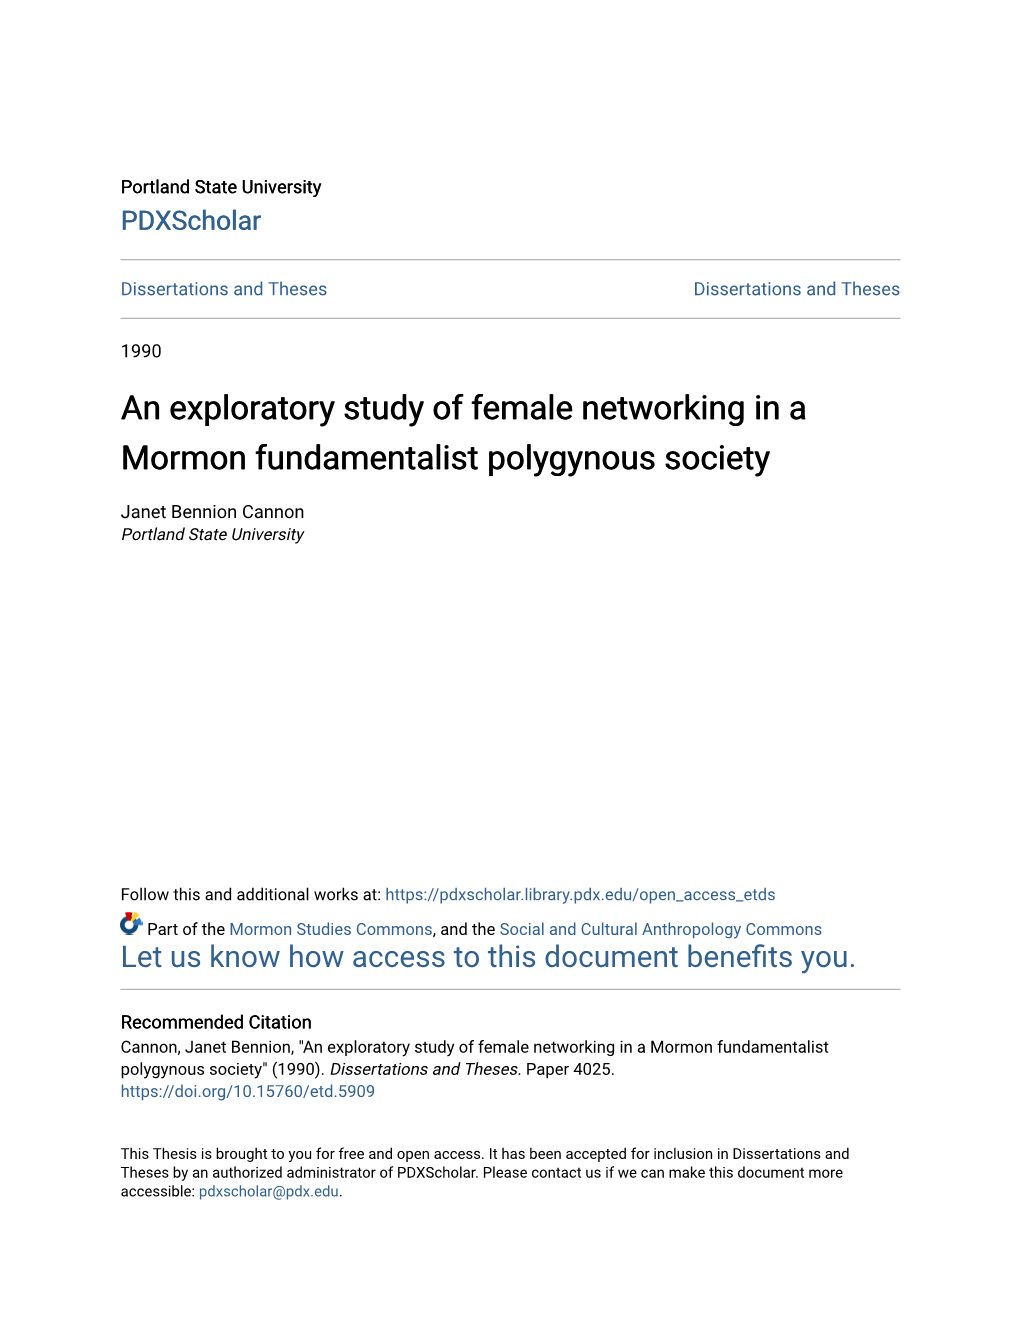 An Exploratory Study of Female Networking in a Mormon Fundamentalist Polygynous Society